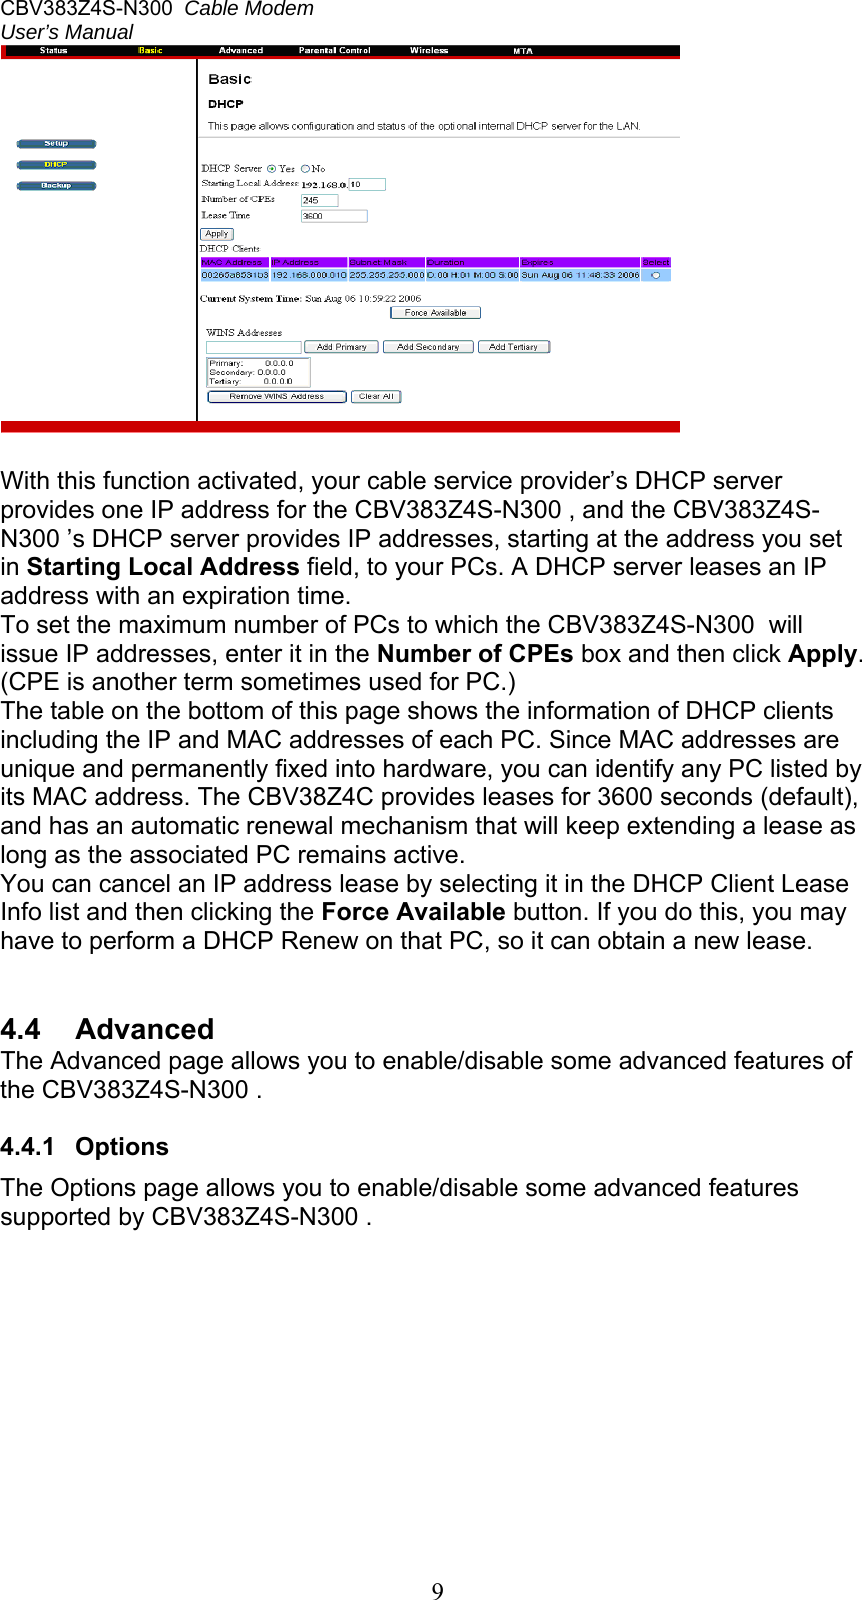 CBV383Z4S-N300  Cable Modem  User’s Manual   9  With this function activated, your cable service provider’s DHCP server provides one IP address for the CBV383Z4S-N300 , and the CBV383Z4S-N300 ’s DHCP server provides IP addresses, starting at the address you set in Starting Local Address field, to your PCs. A DHCP server leases an IP address with an expiration time. To set the maximum number of PCs to which the CBV383Z4S-N300  will issue IP addresses, enter it in the Number of CPEs box and then click Apply. (CPE is another term sometimes used for PC.) The table on the bottom of this page shows the information of DHCP clients including the IP and MAC addresses of each PC. Since MAC addresses are unique and permanently fixed into hardware, you can identify any PC listed by its MAC address. The CBV38Z4C provides leases for 3600 seconds (default), and has an automatic renewal mechanism that will keep extending a lease as long as the associated PC remains active. You can cancel an IP address lease by selecting it in the DHCP Client Lease Info list and then clicking the Force Available button. If you do this, you may have to perform a DHCP Renew on that PC, so it can obtain a new lease.   4.4  Advanced The Advanced page allows you to enable/disable some advanced features of the CBV383Z4S-N300 .  4.4.1  Options The Options page allows you to enable/disable some advanced features supported by CBV383Z4S-N300 .  